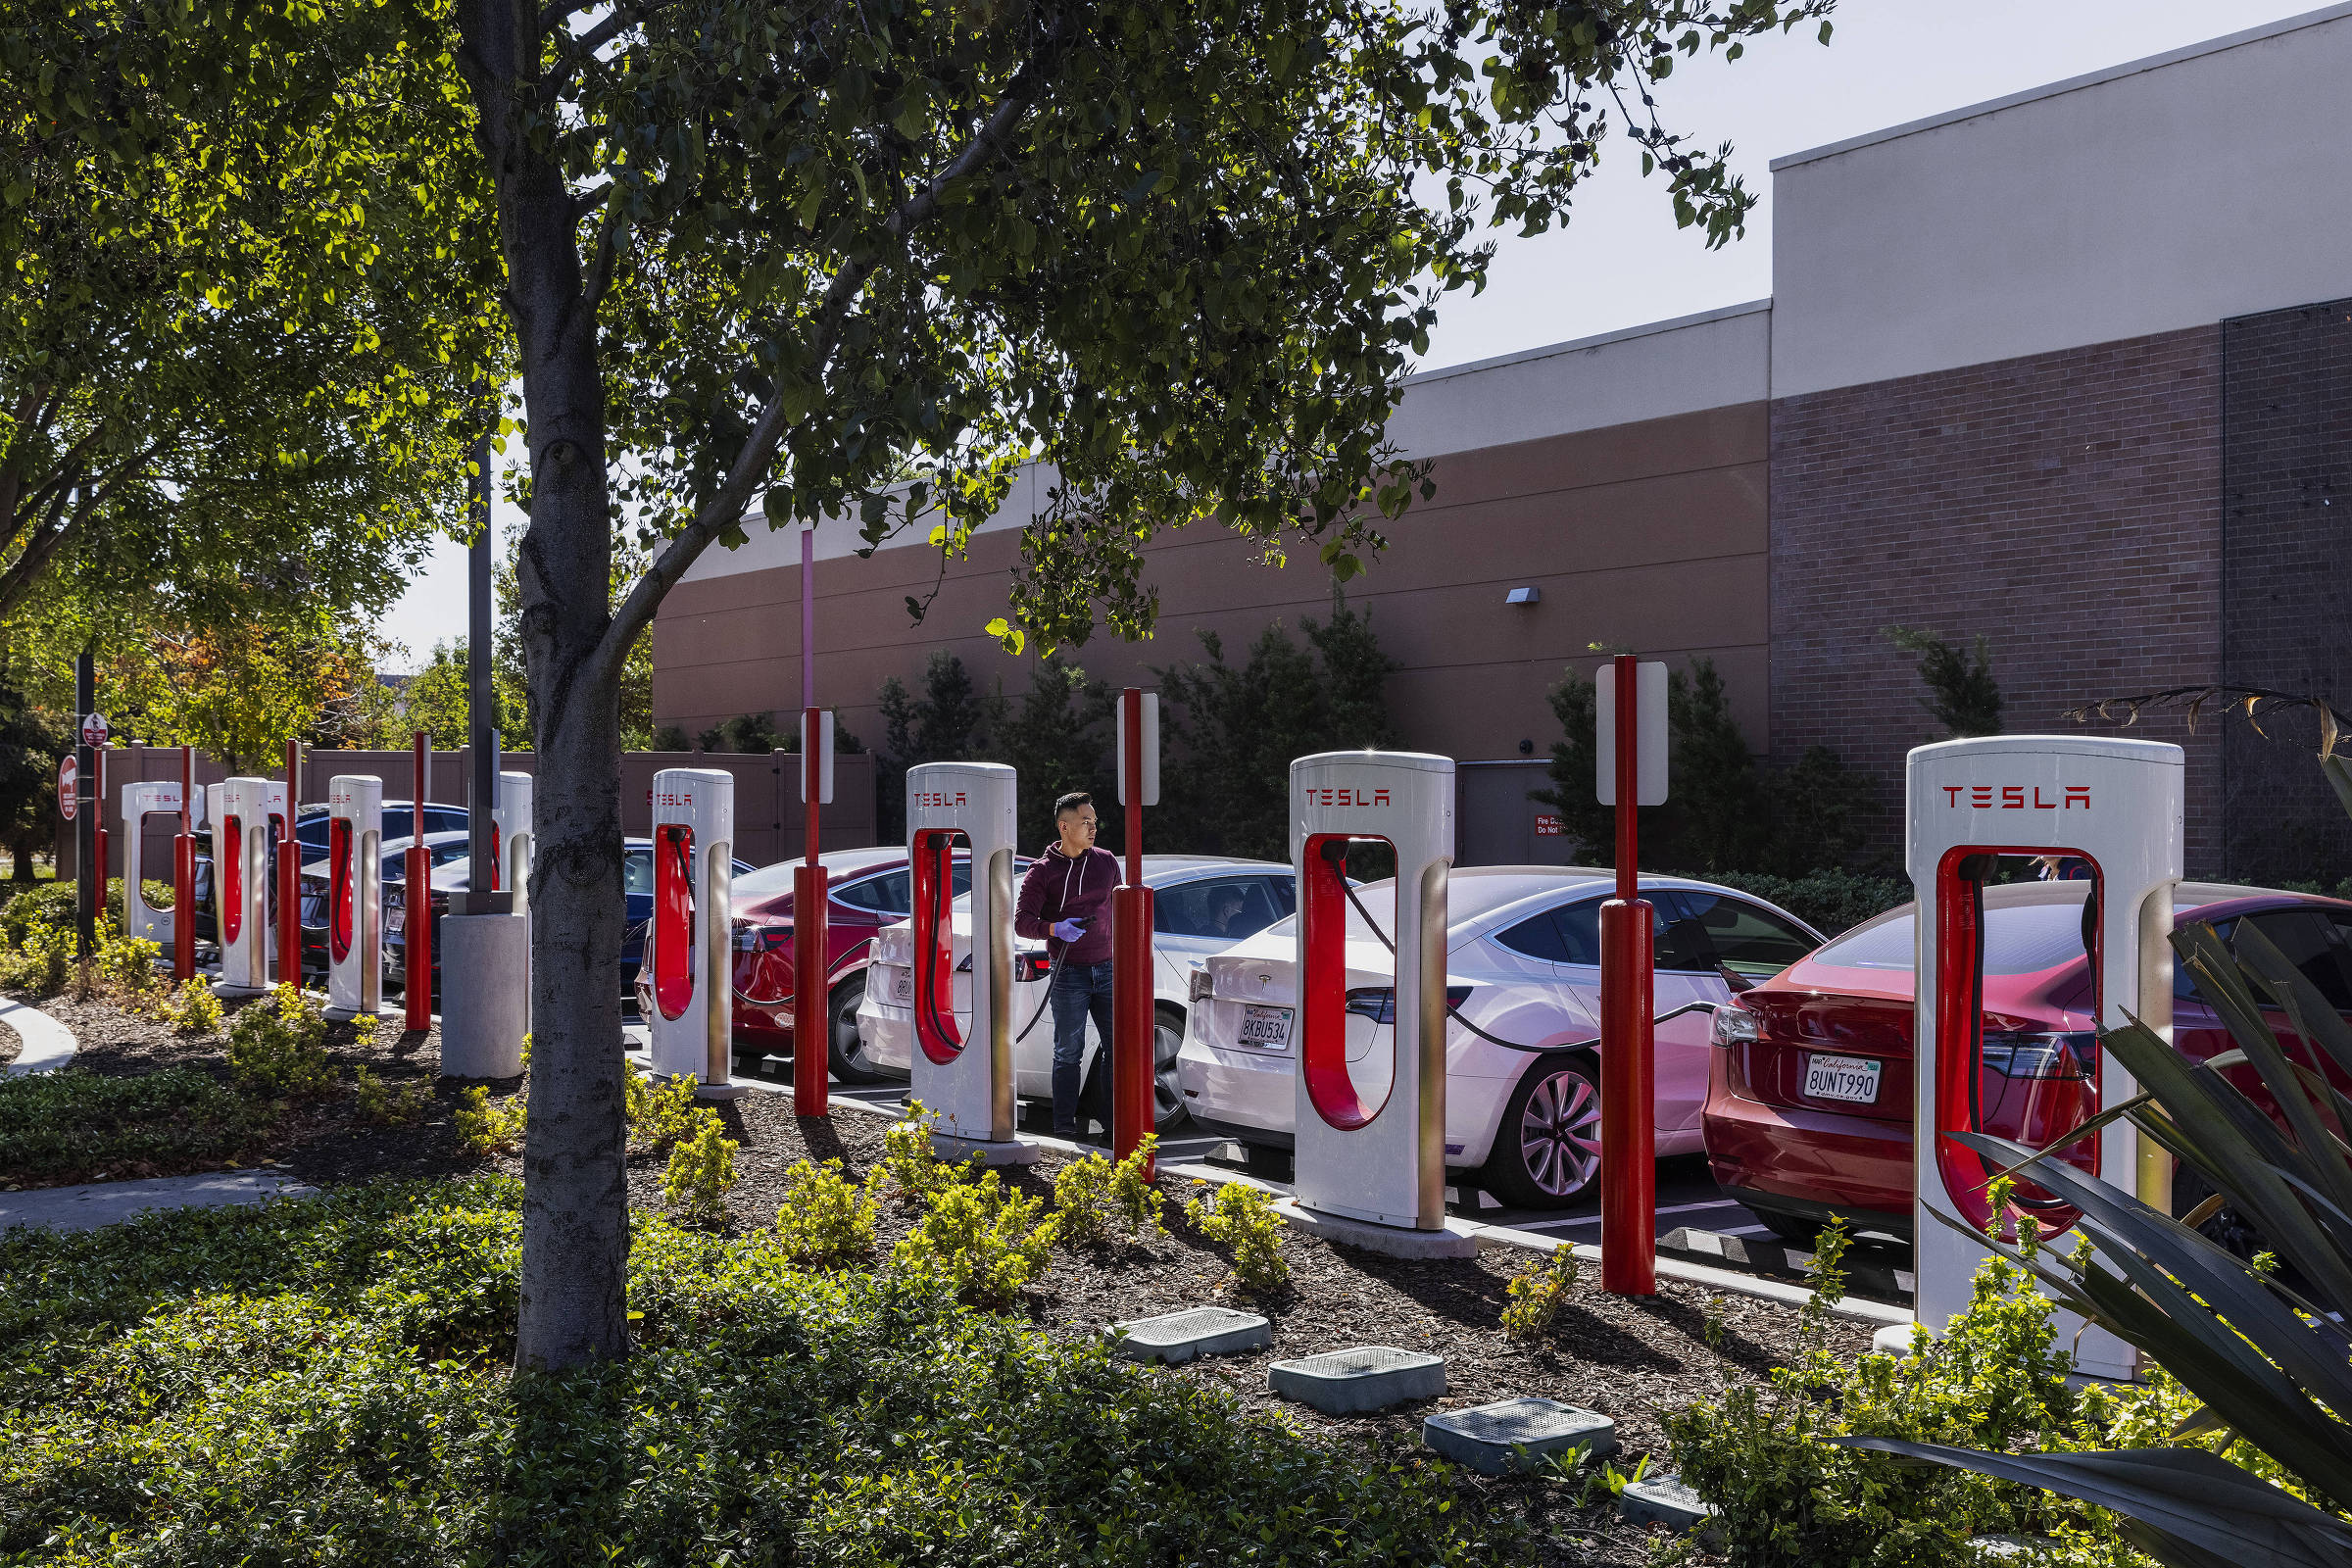 Tesla charging station for electric cars in San José, California